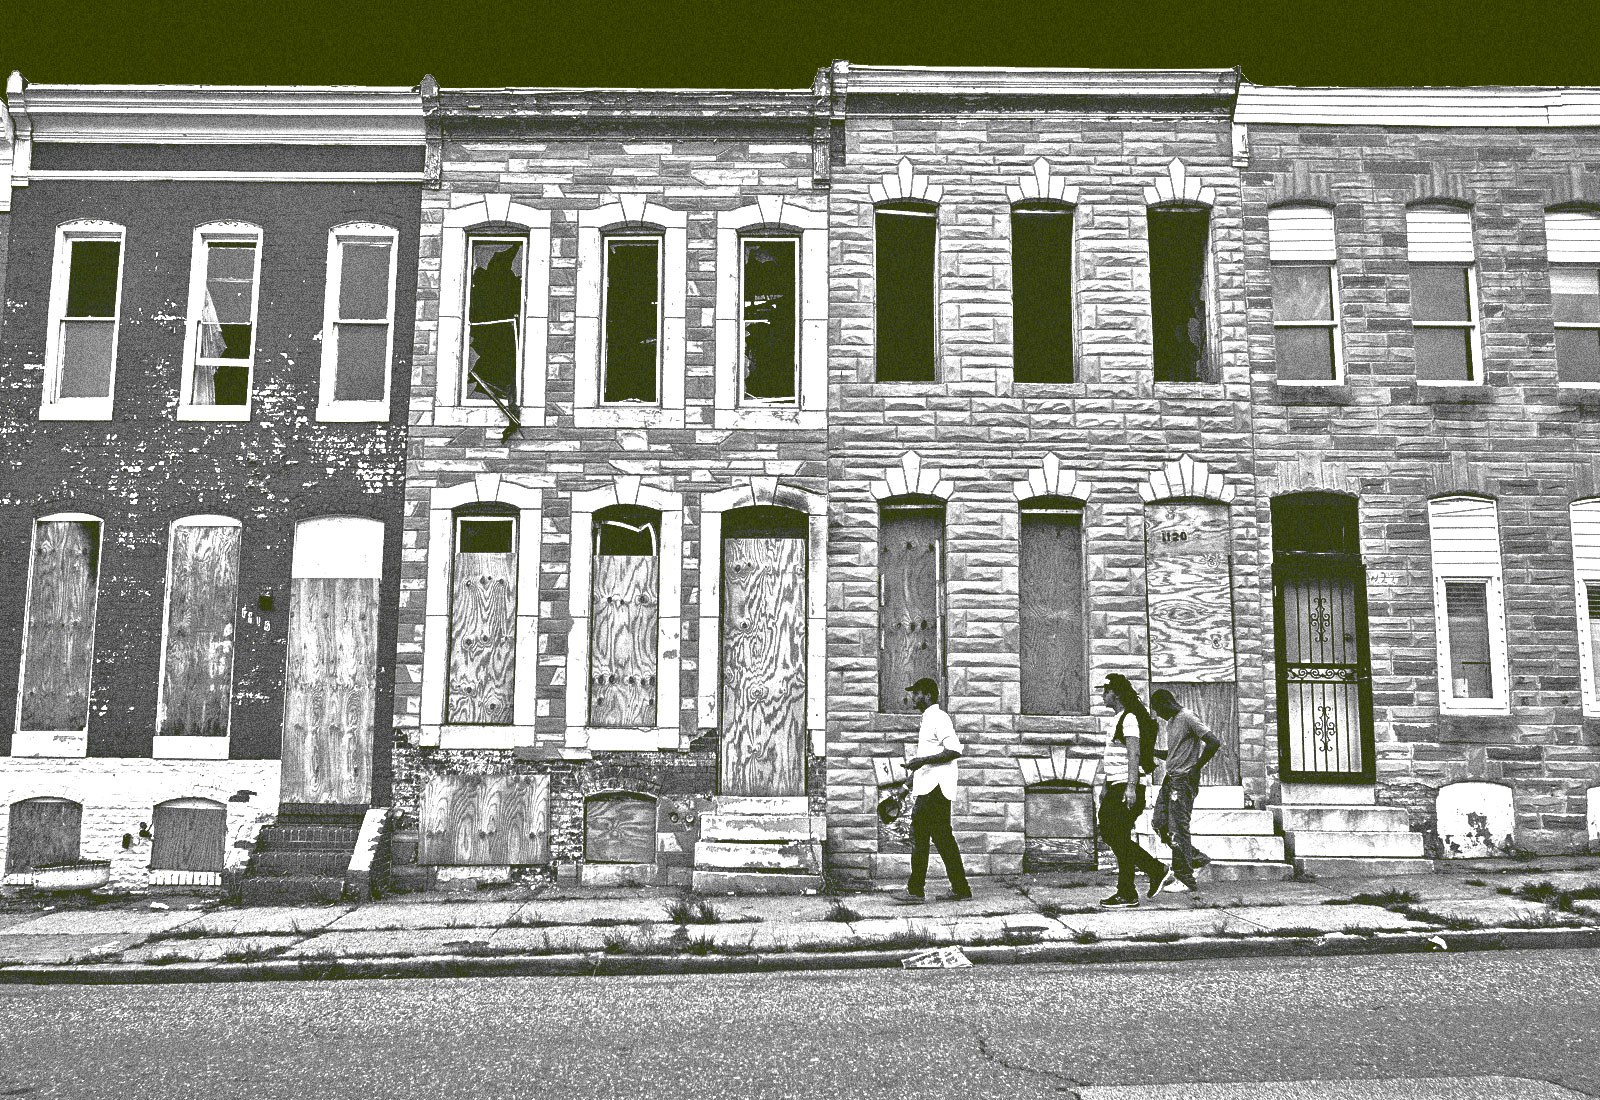 Three pedestrians pass by a row of boarded up houses in east Baltimore, Maryland.